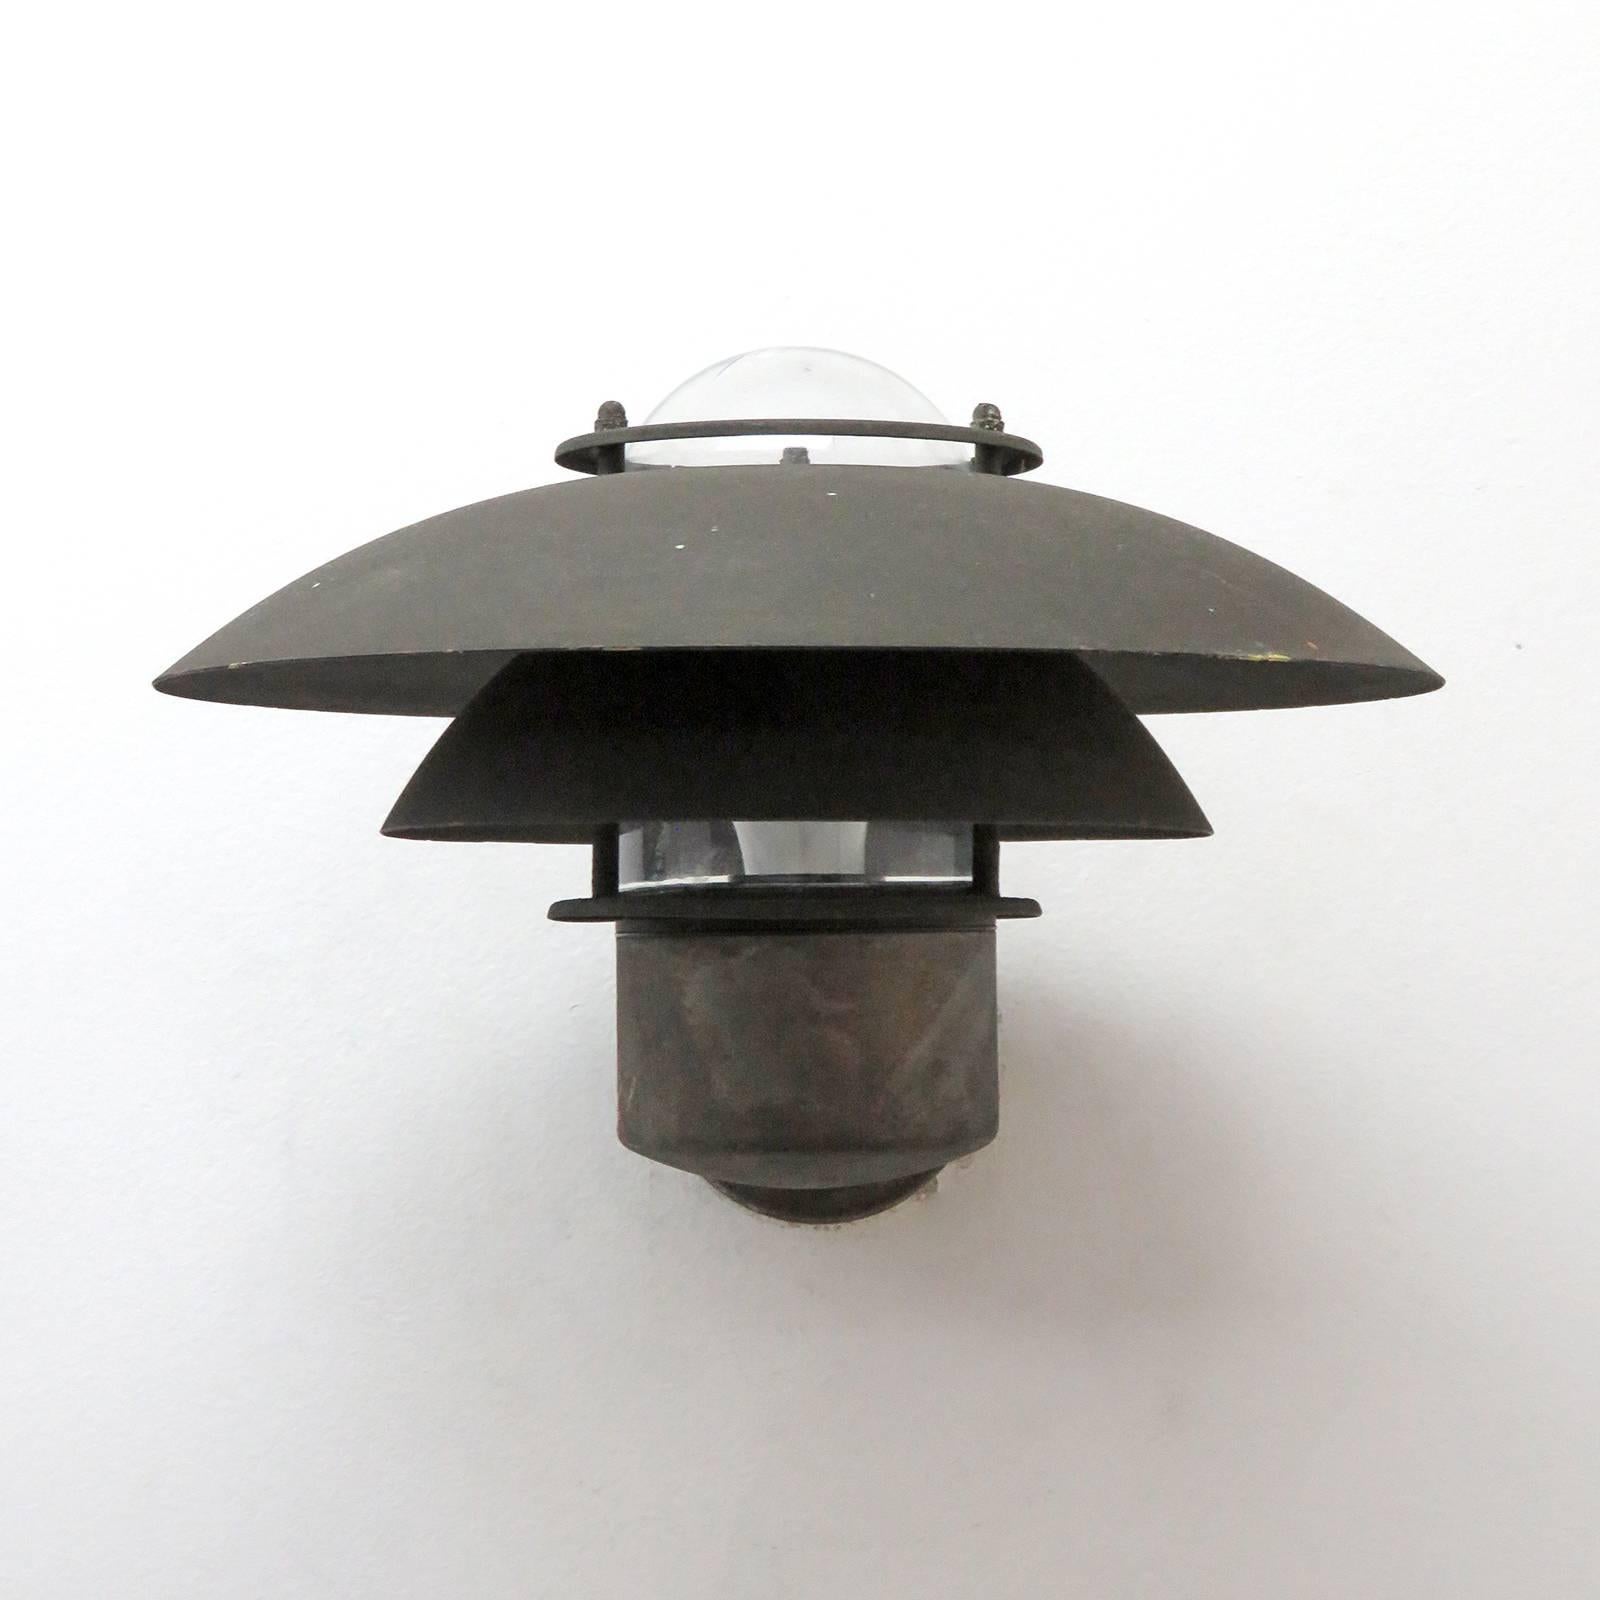 Wonderful Danish outdoor wall lights by Form Light in weathered copper with glass bulb enclosures. Priced individually.